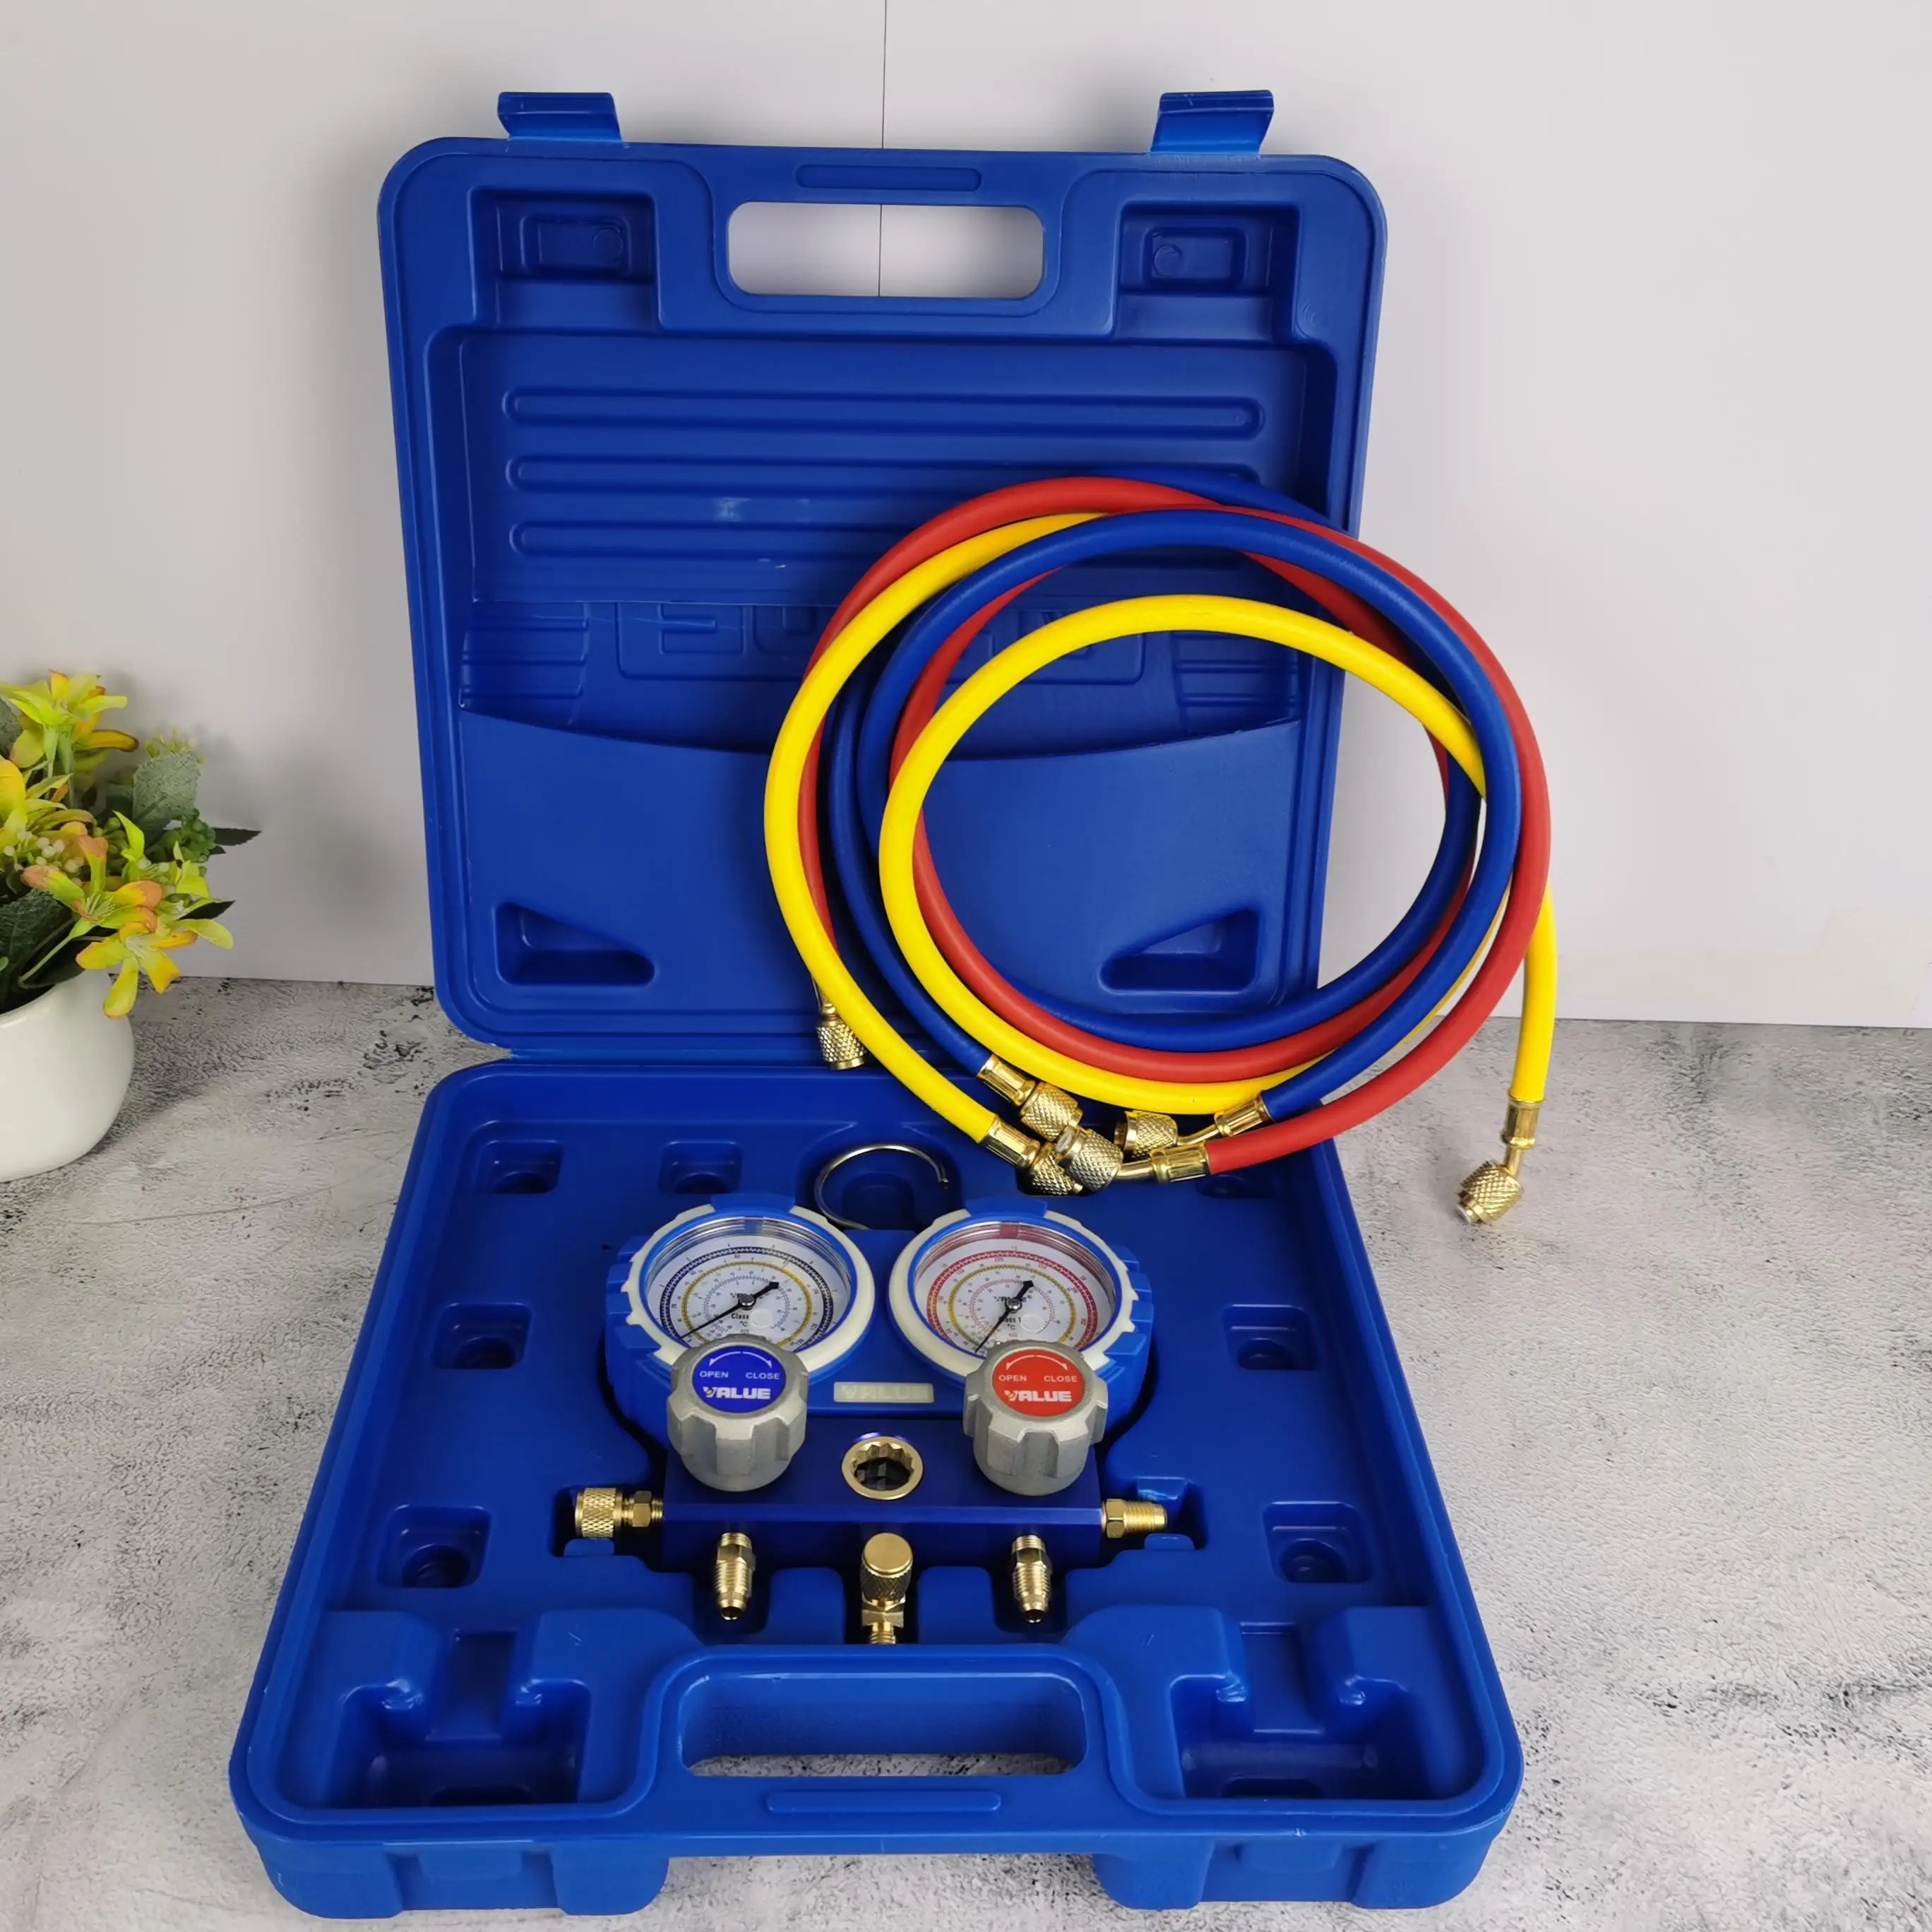 Liquid Filling Pipe Double Meter Fluorine Meter Air-conditioned Set Fluoridation Table Group Refrigerant VALUE VMG-2-R22-B